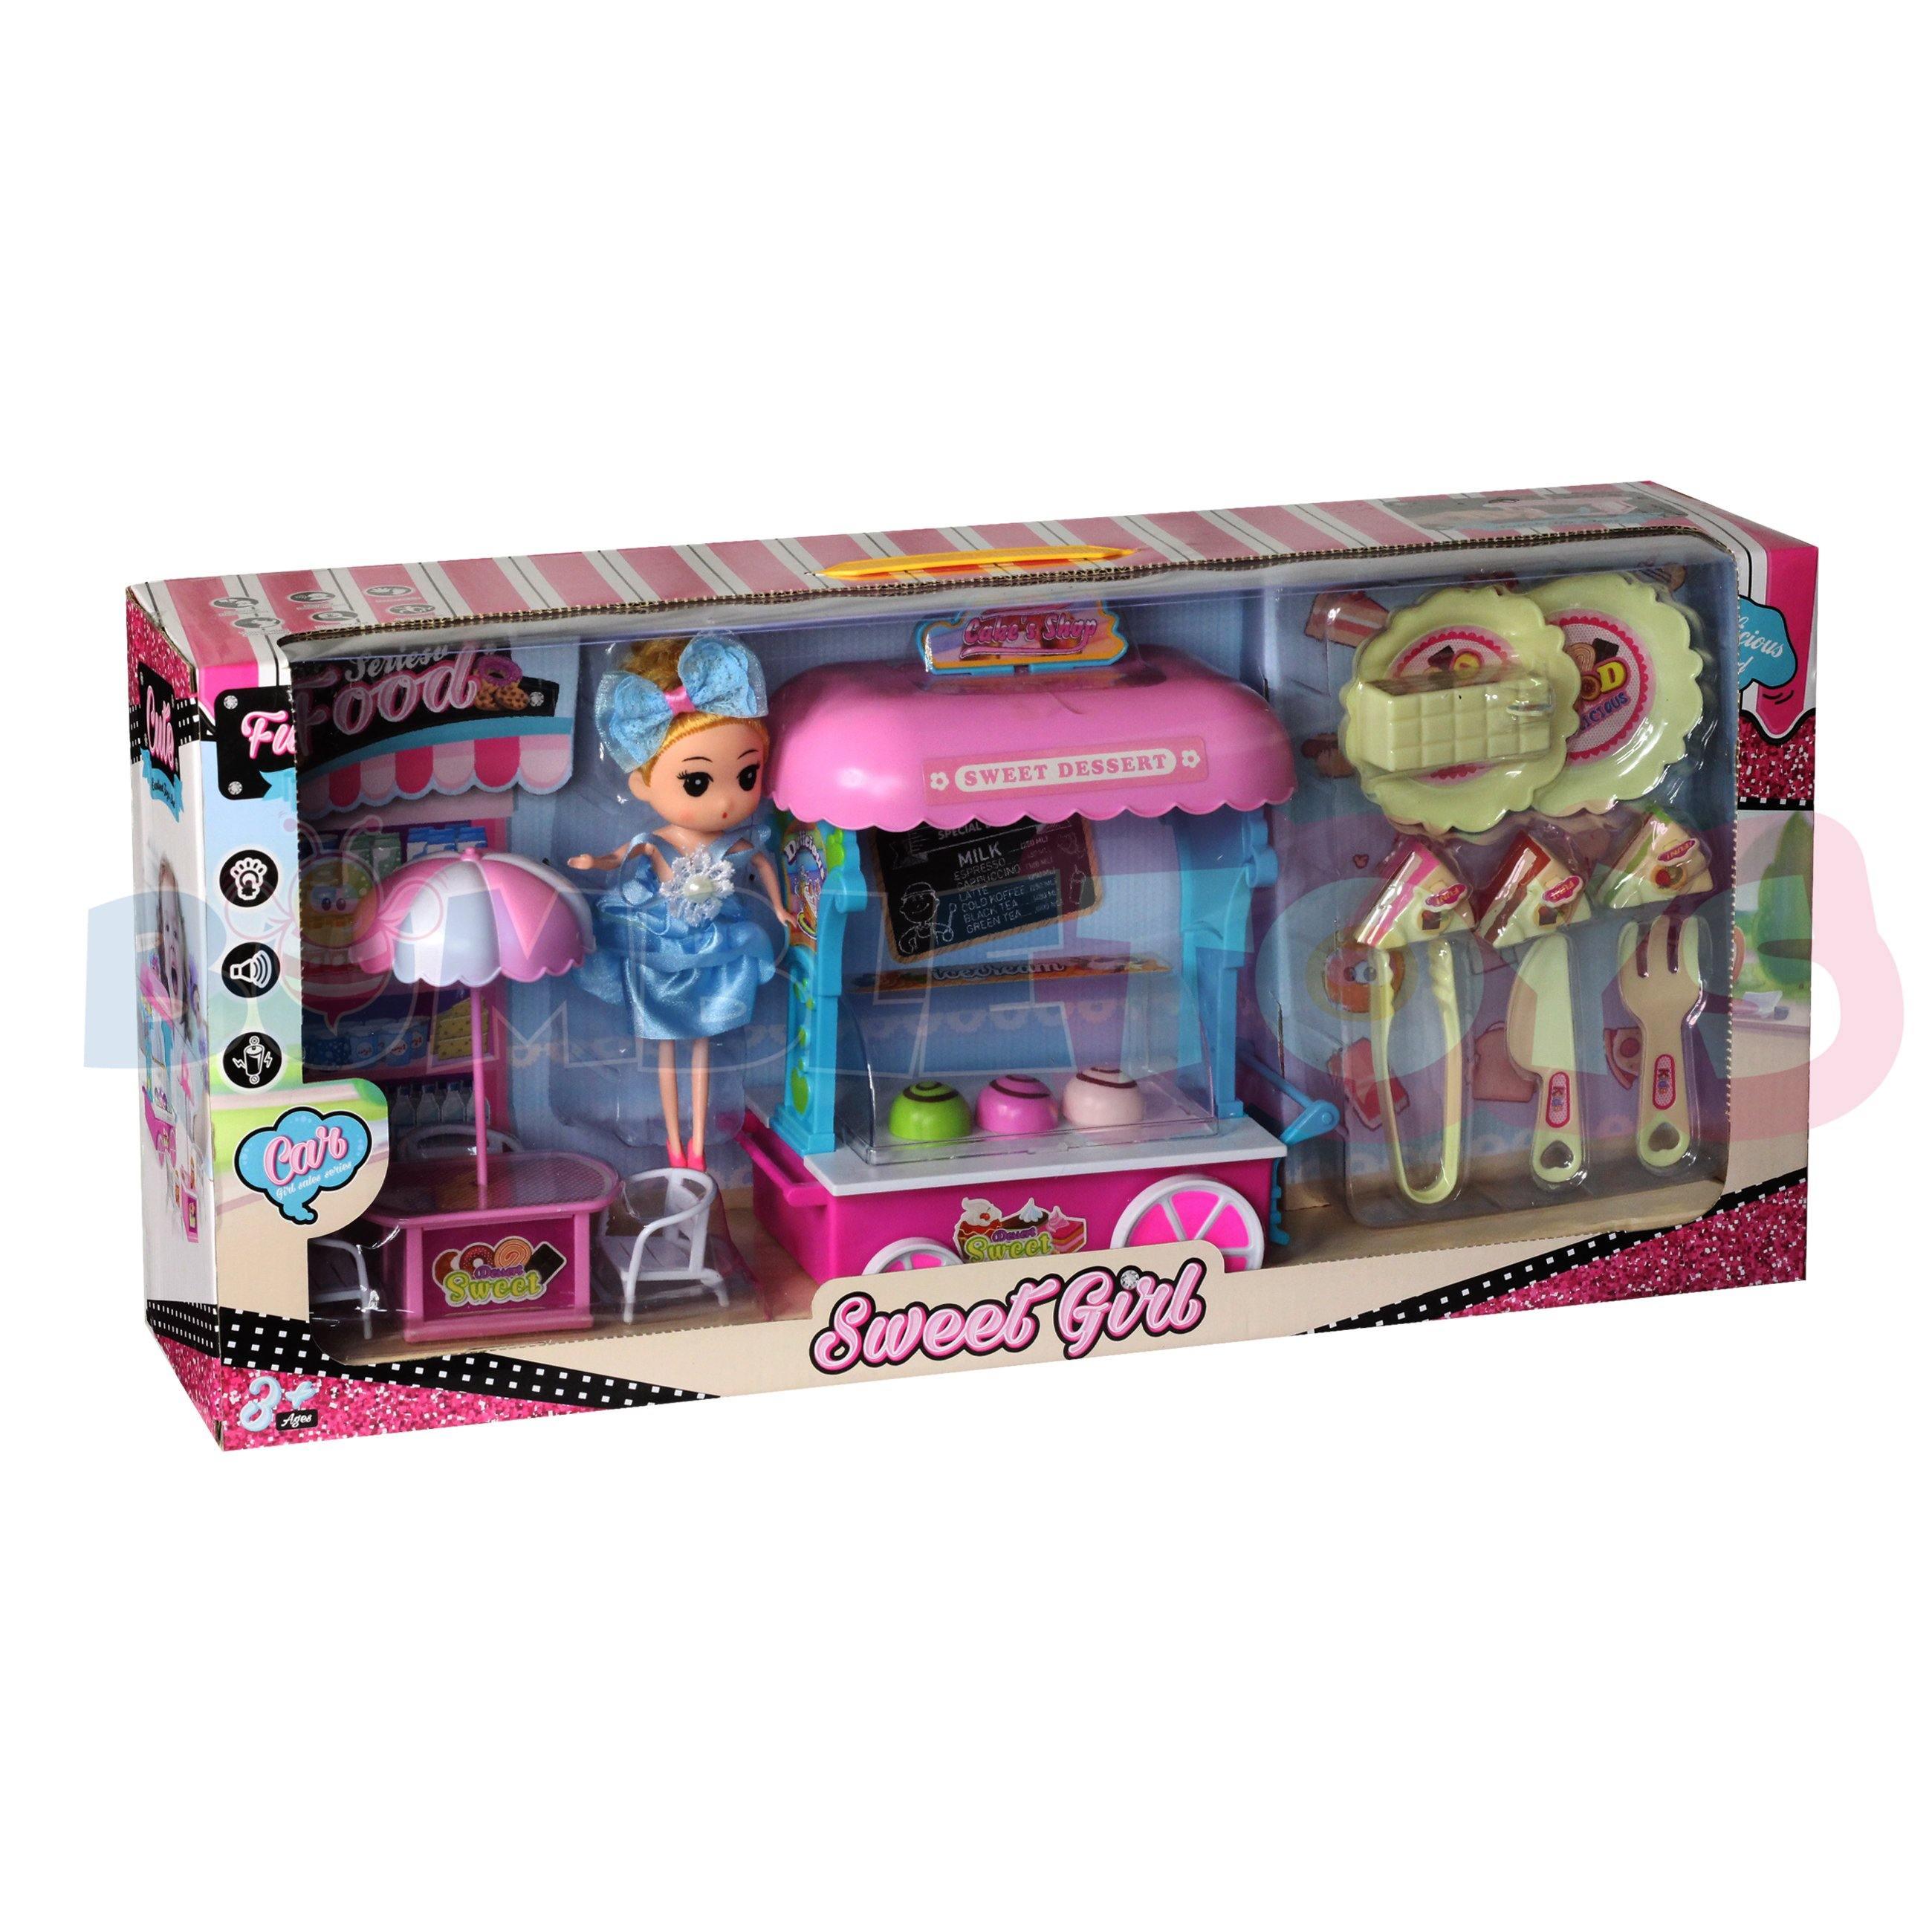 Sweet Girl Dessert Cake's Shop With Light And Sound - BumbleToys - 5-7 Years, Girls, Roleplay, Toy House